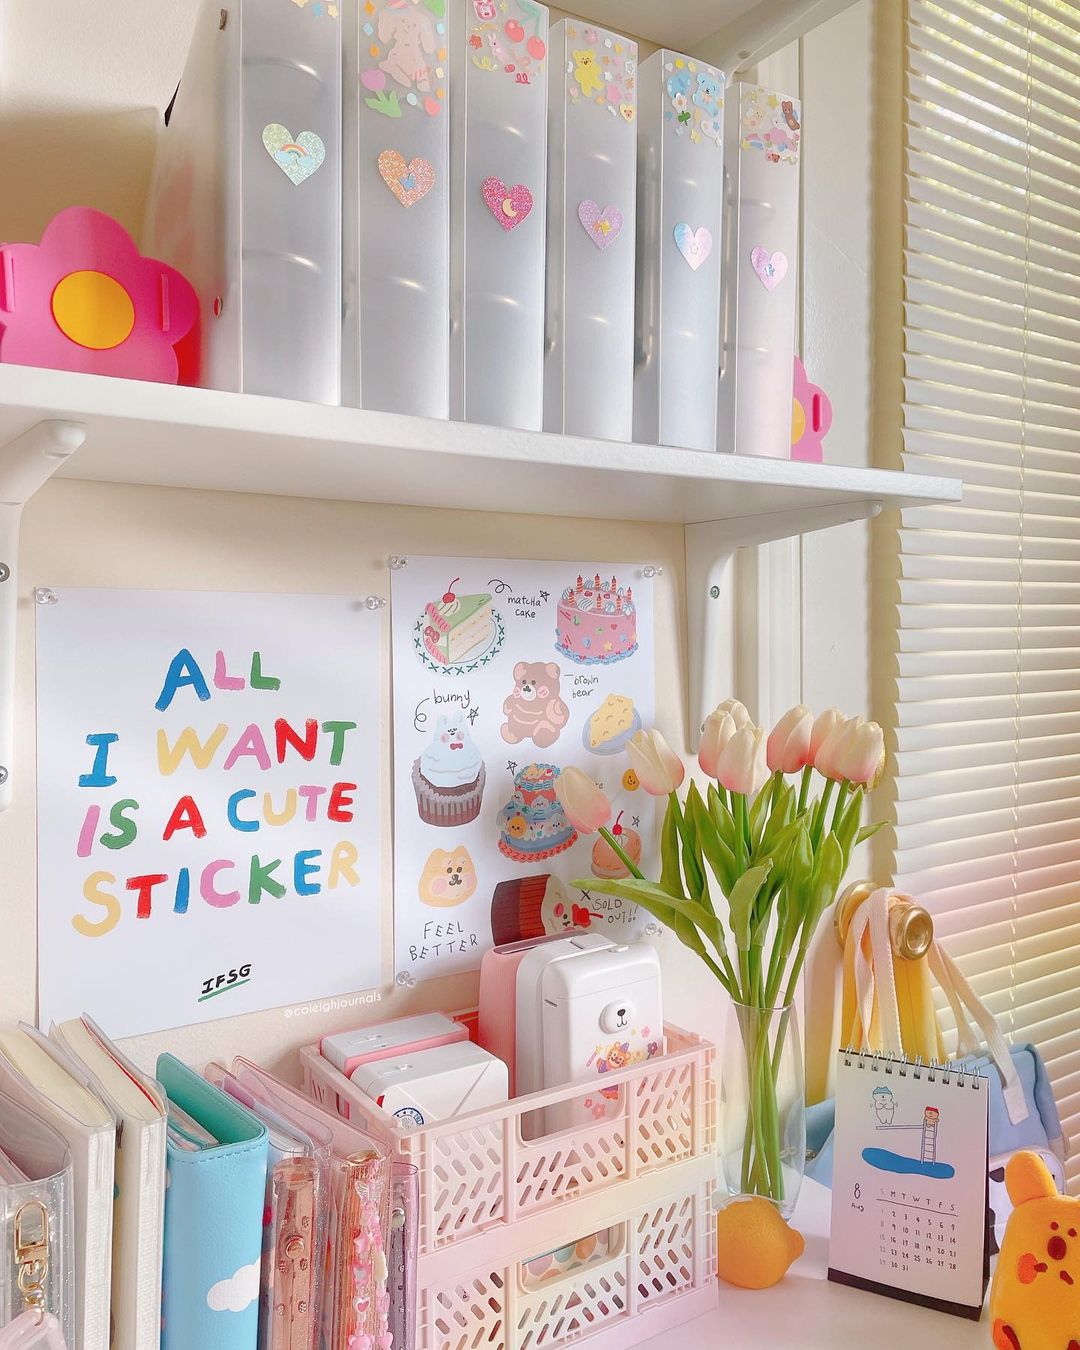 Desk Organization with Magazine Boxes. Photo by Instagram user @caleighjournals